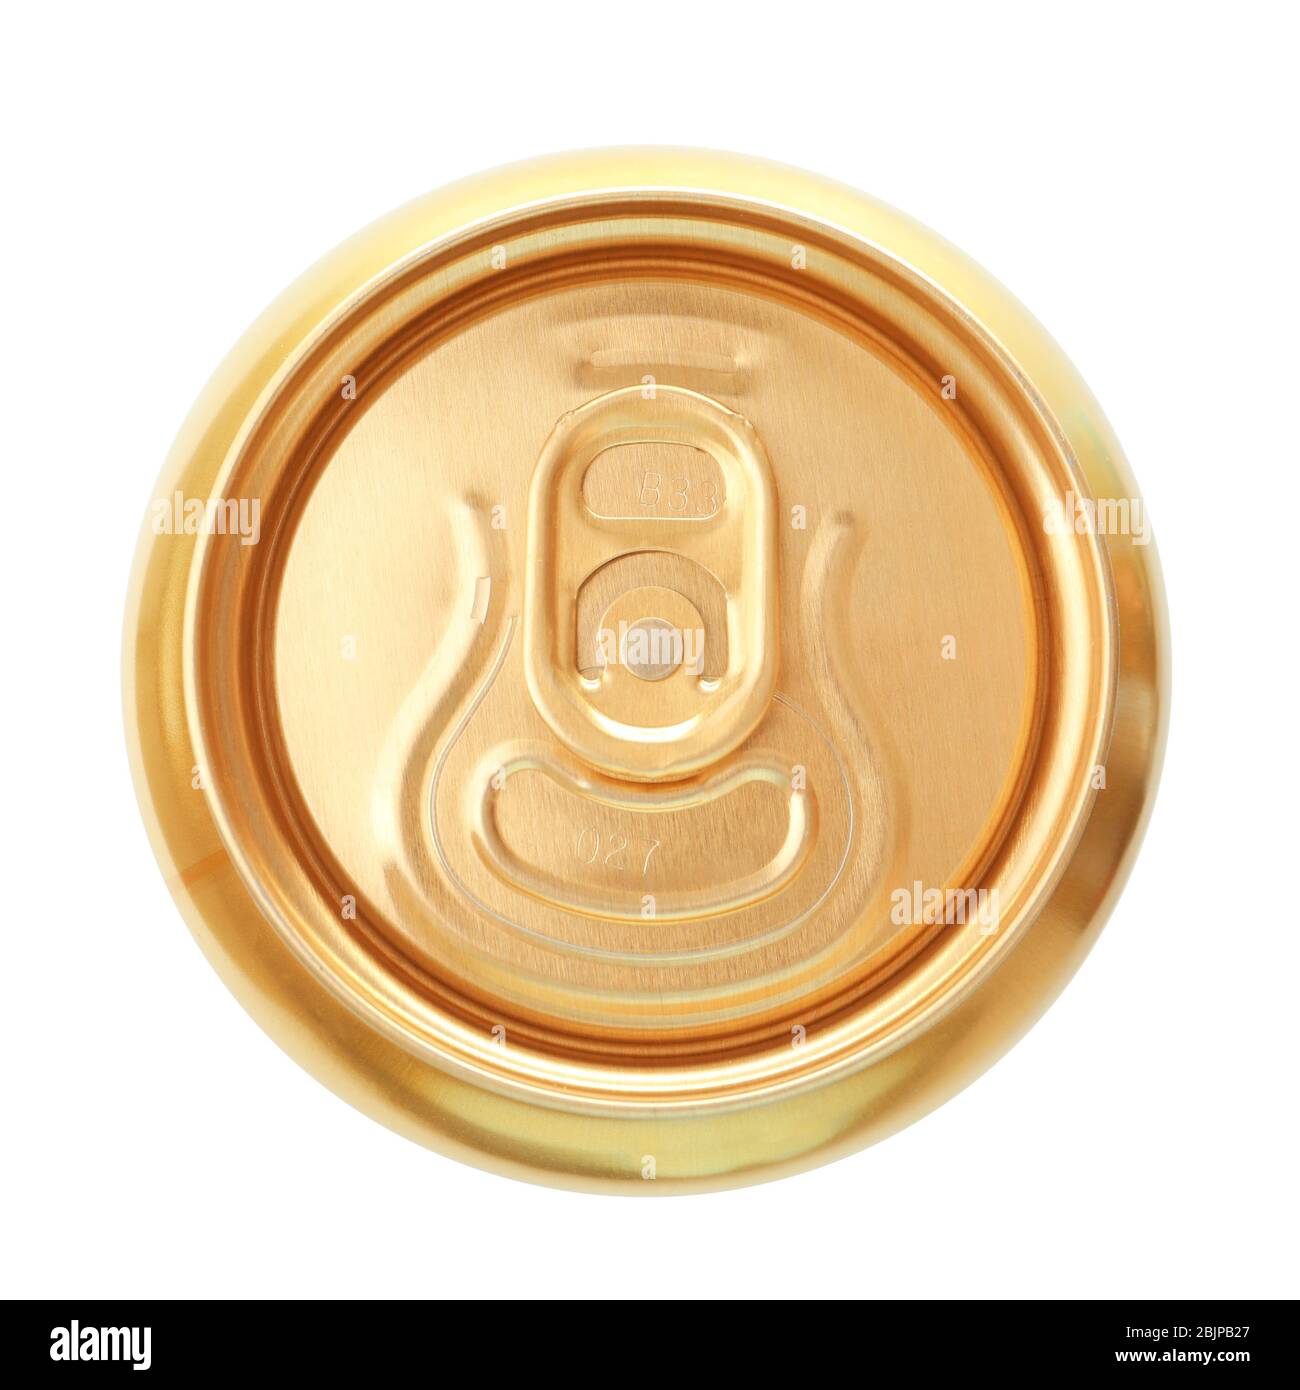 KYIV, UKRAINE - SEPTEMBER 18, 2017: Closed can with drink of popular brand on white background Stock Photo